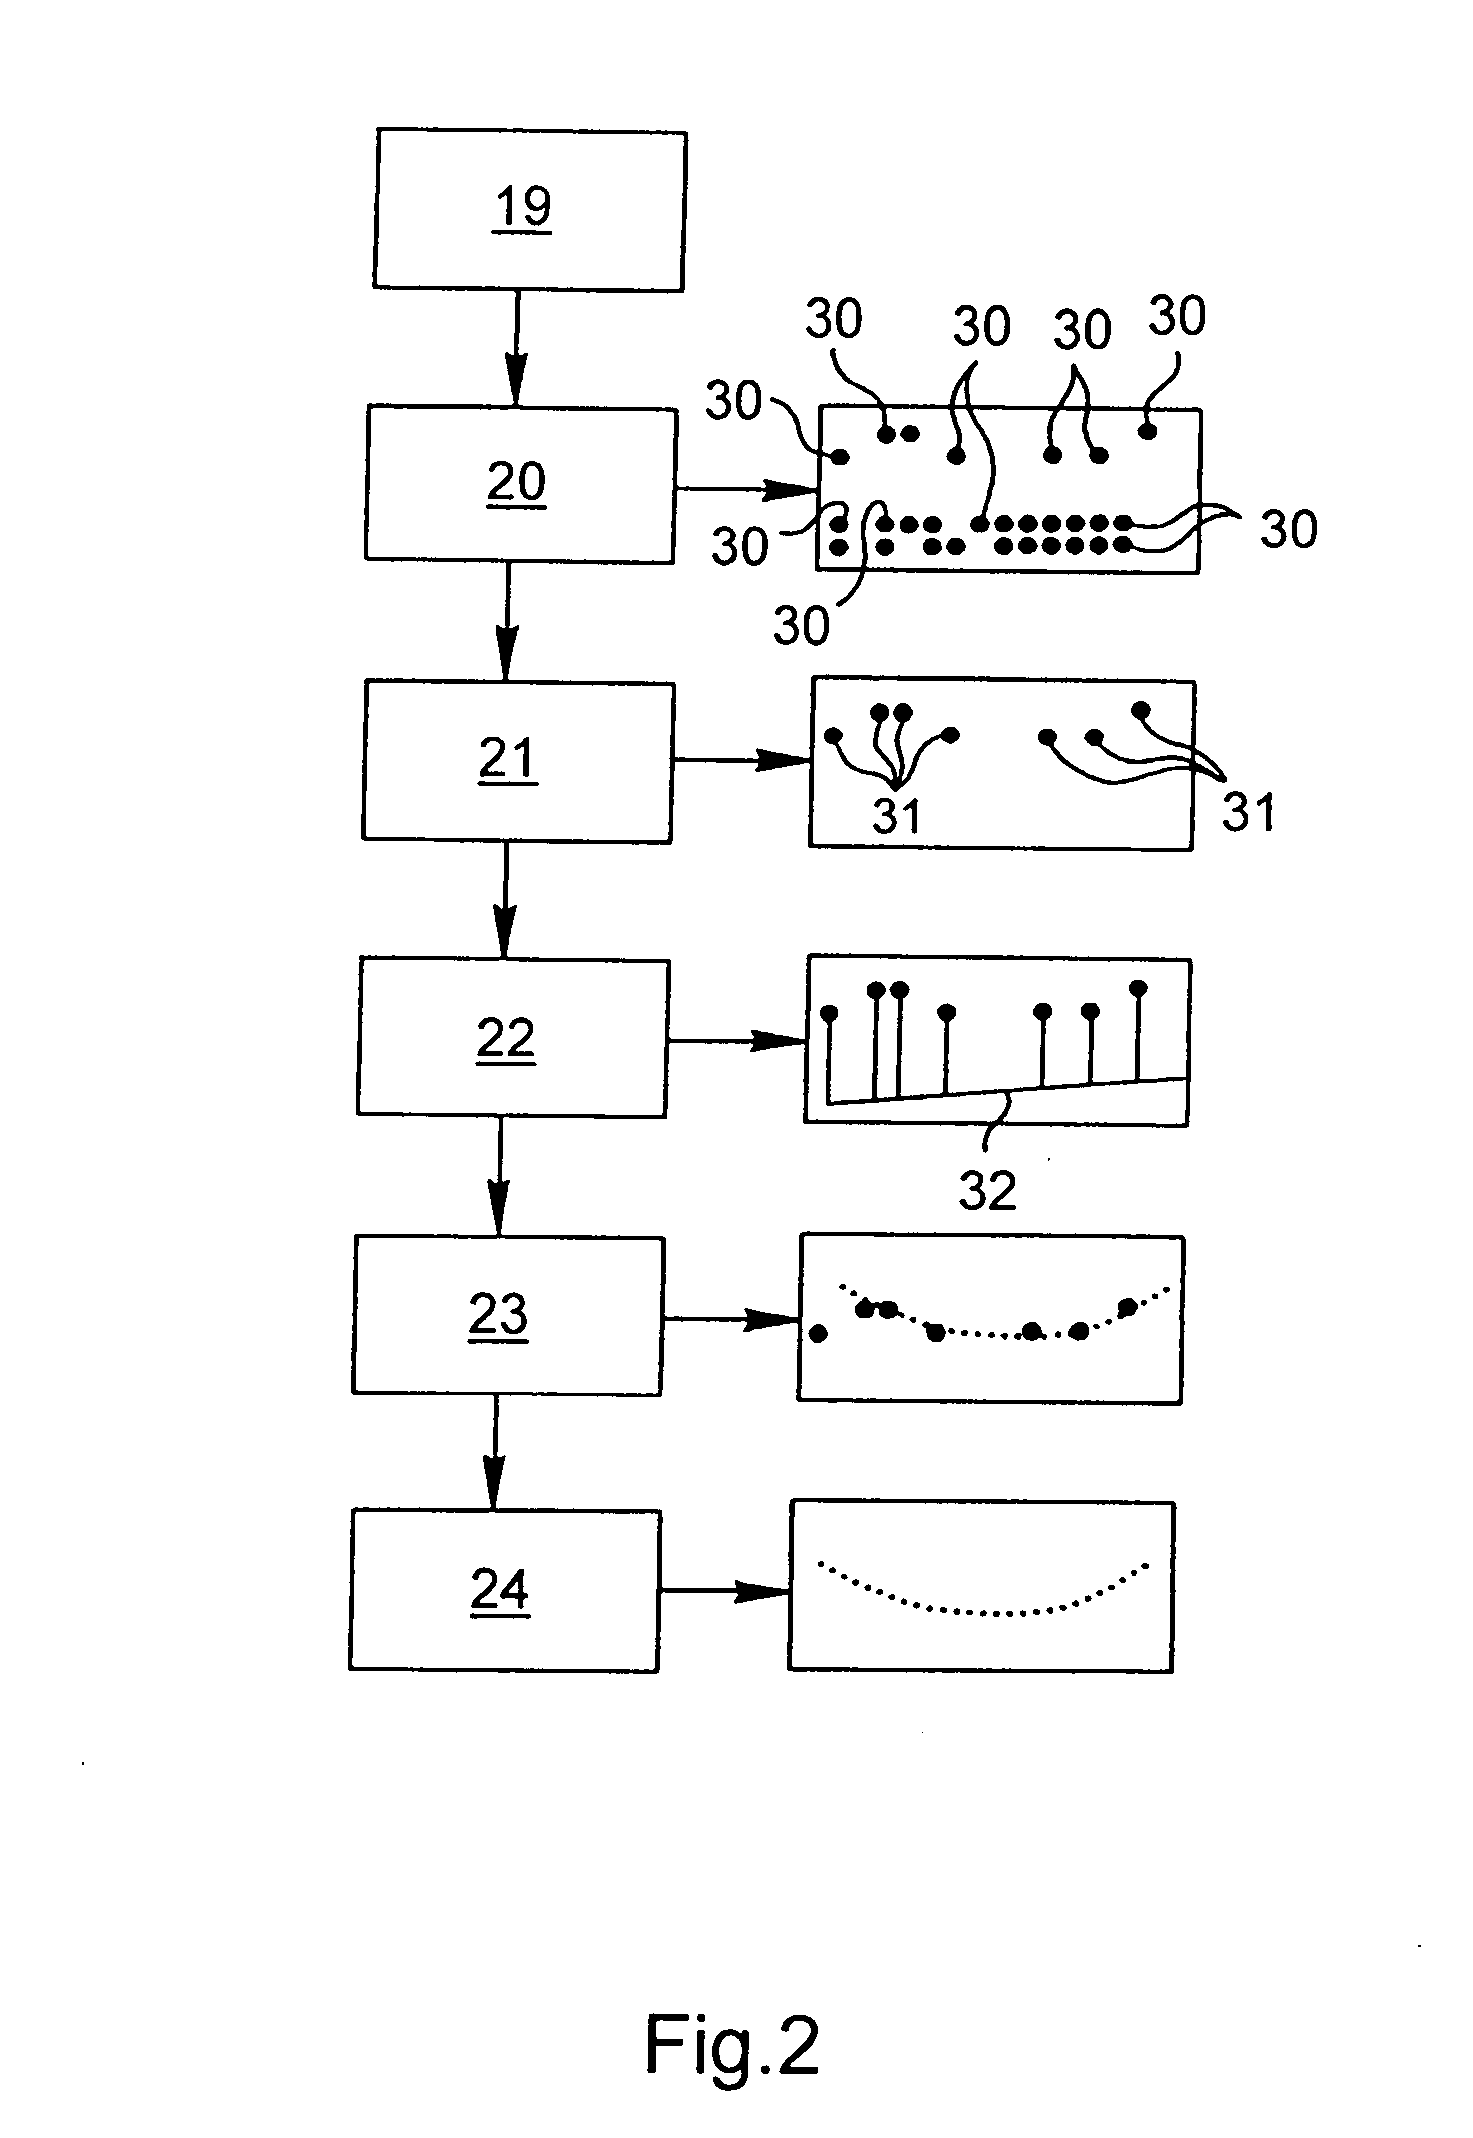 Method of Detecting Suspended Filamentary Objects by Telemetry